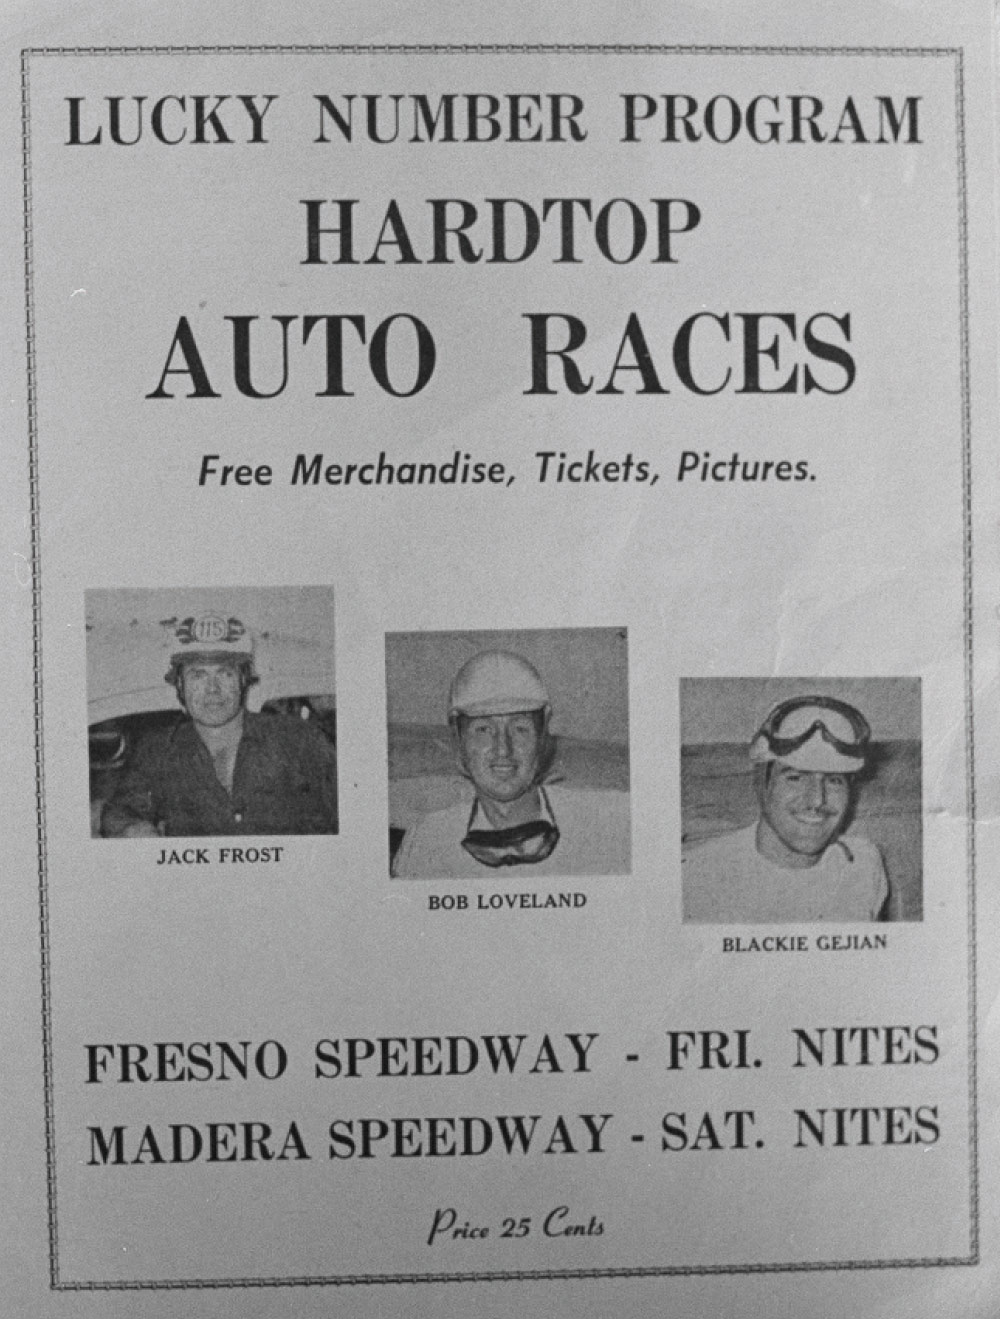 Hardtop racing poster from the early ’50s featured Blackie